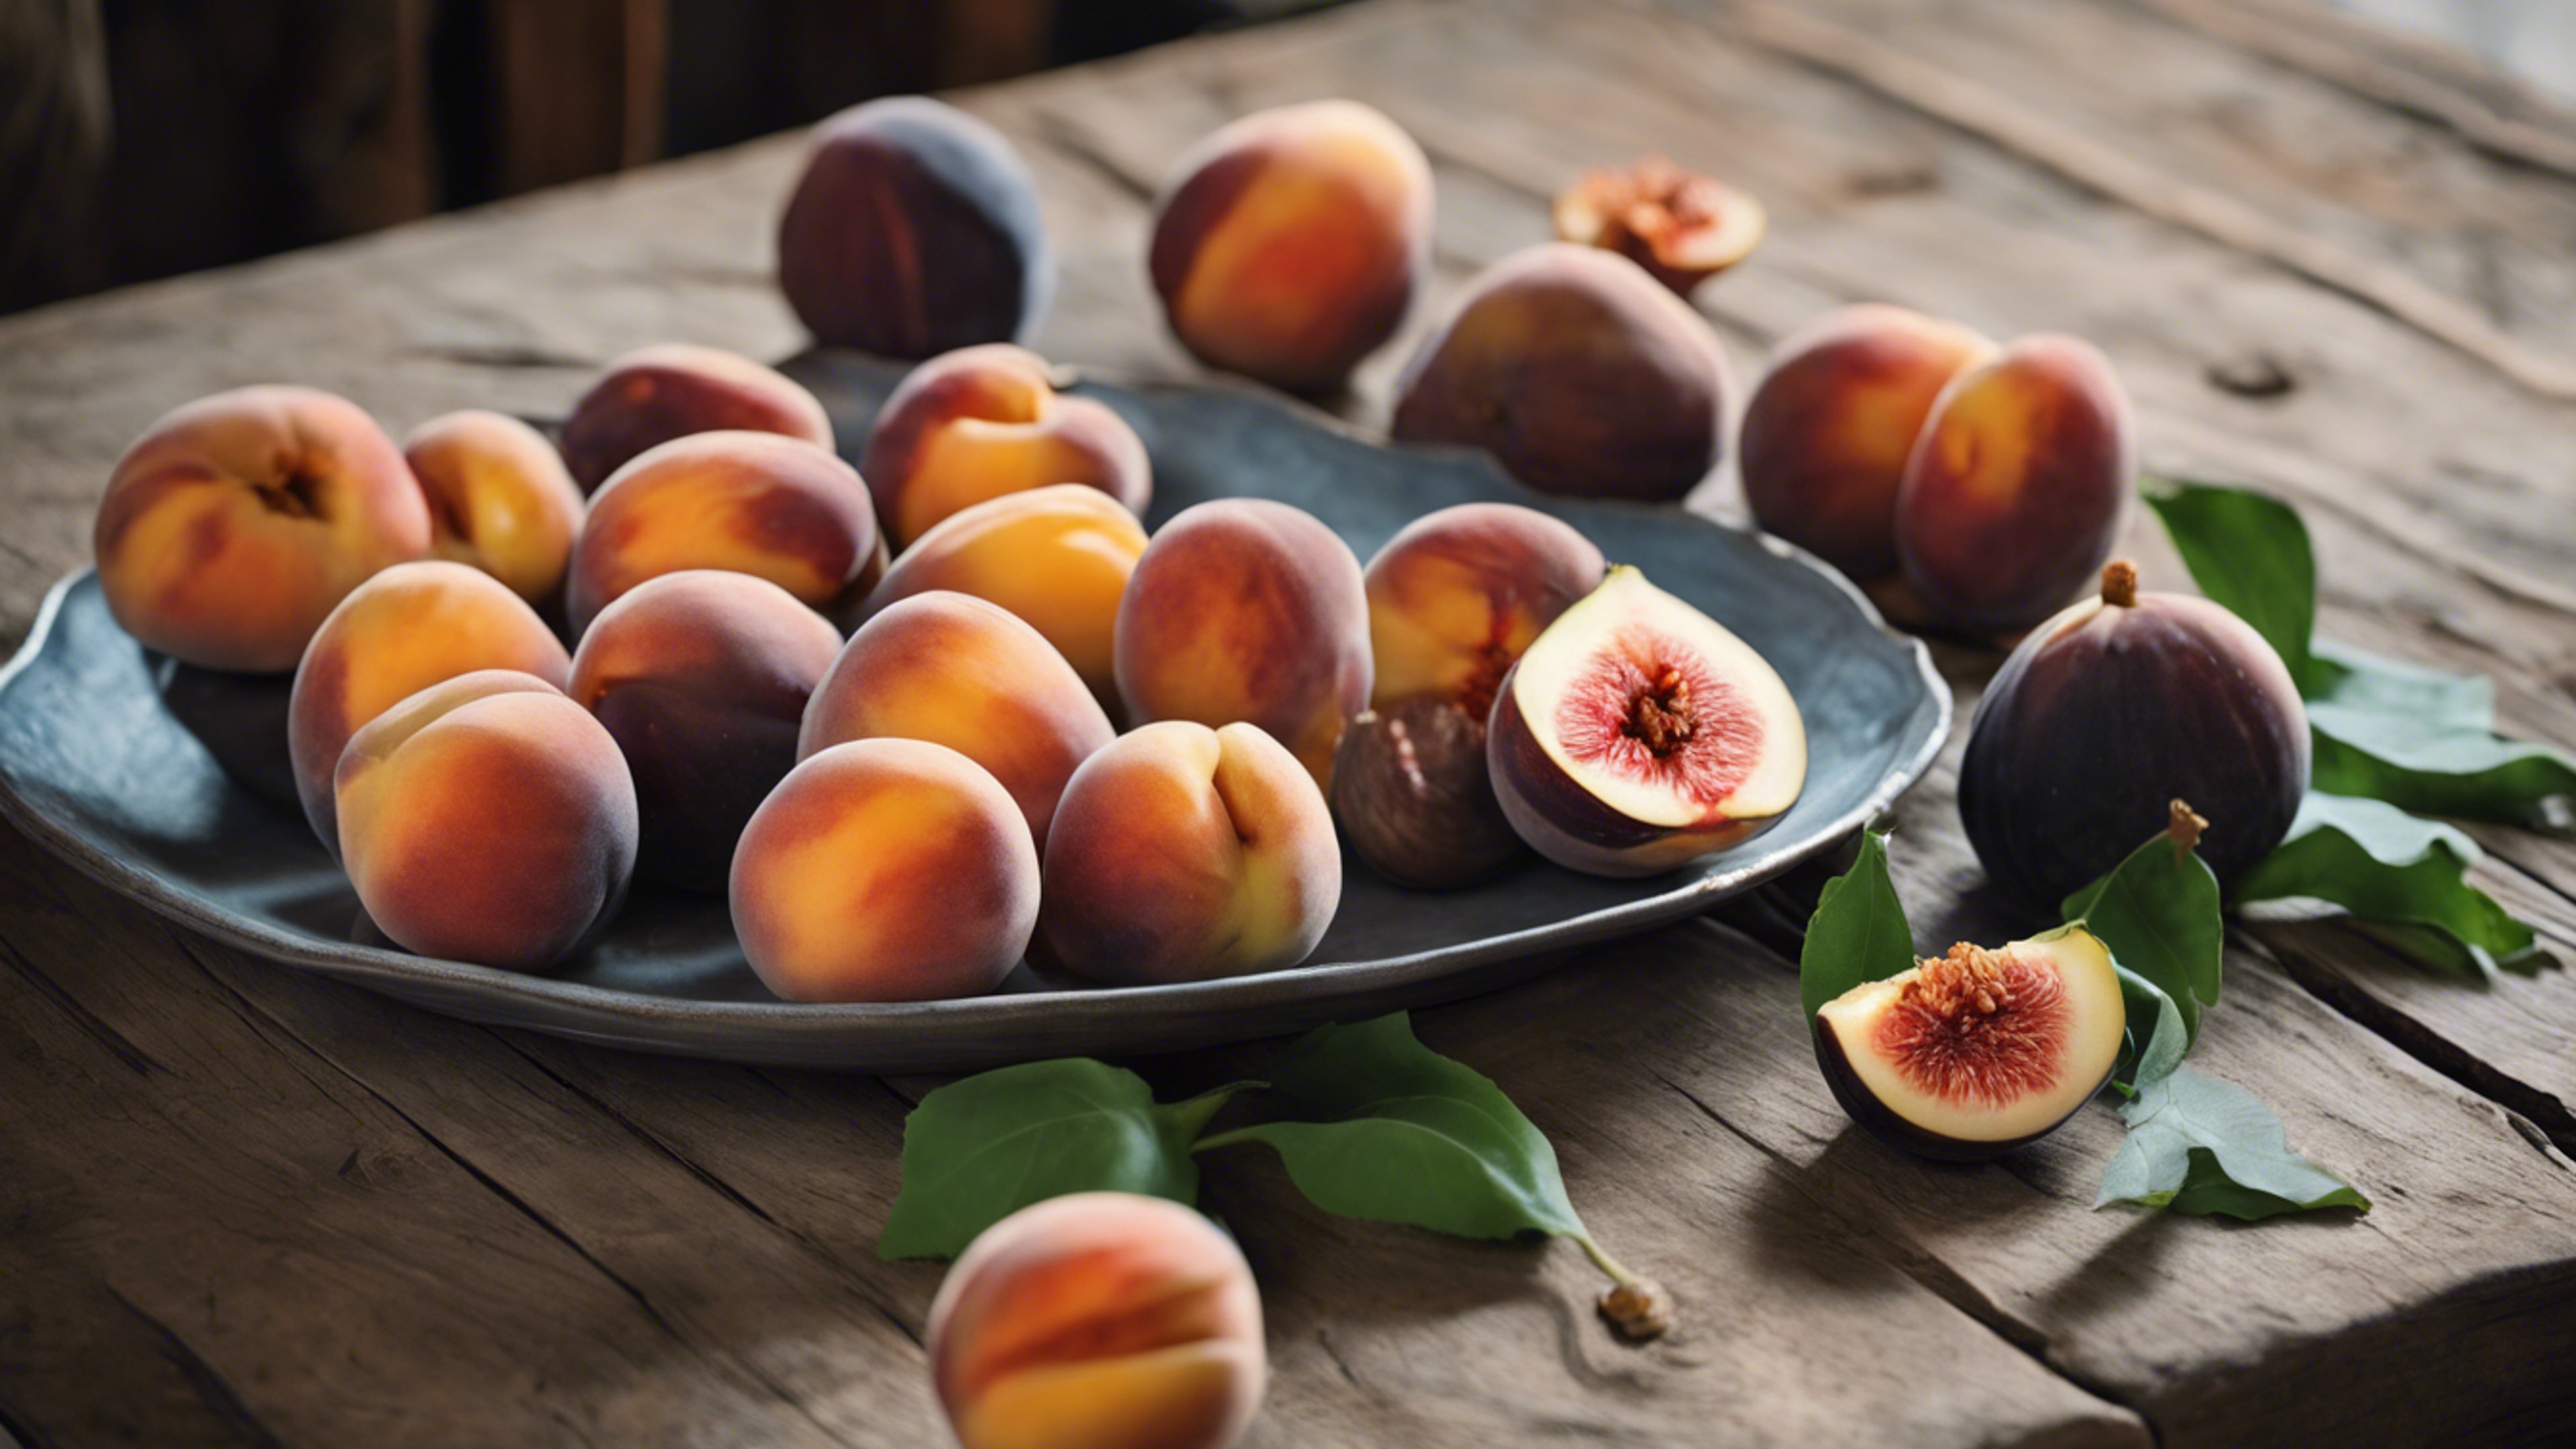 Still life of peaches and figs arranged beautifully on a rustic wooden table. Tapet[c31d3ce6096543dcac89]